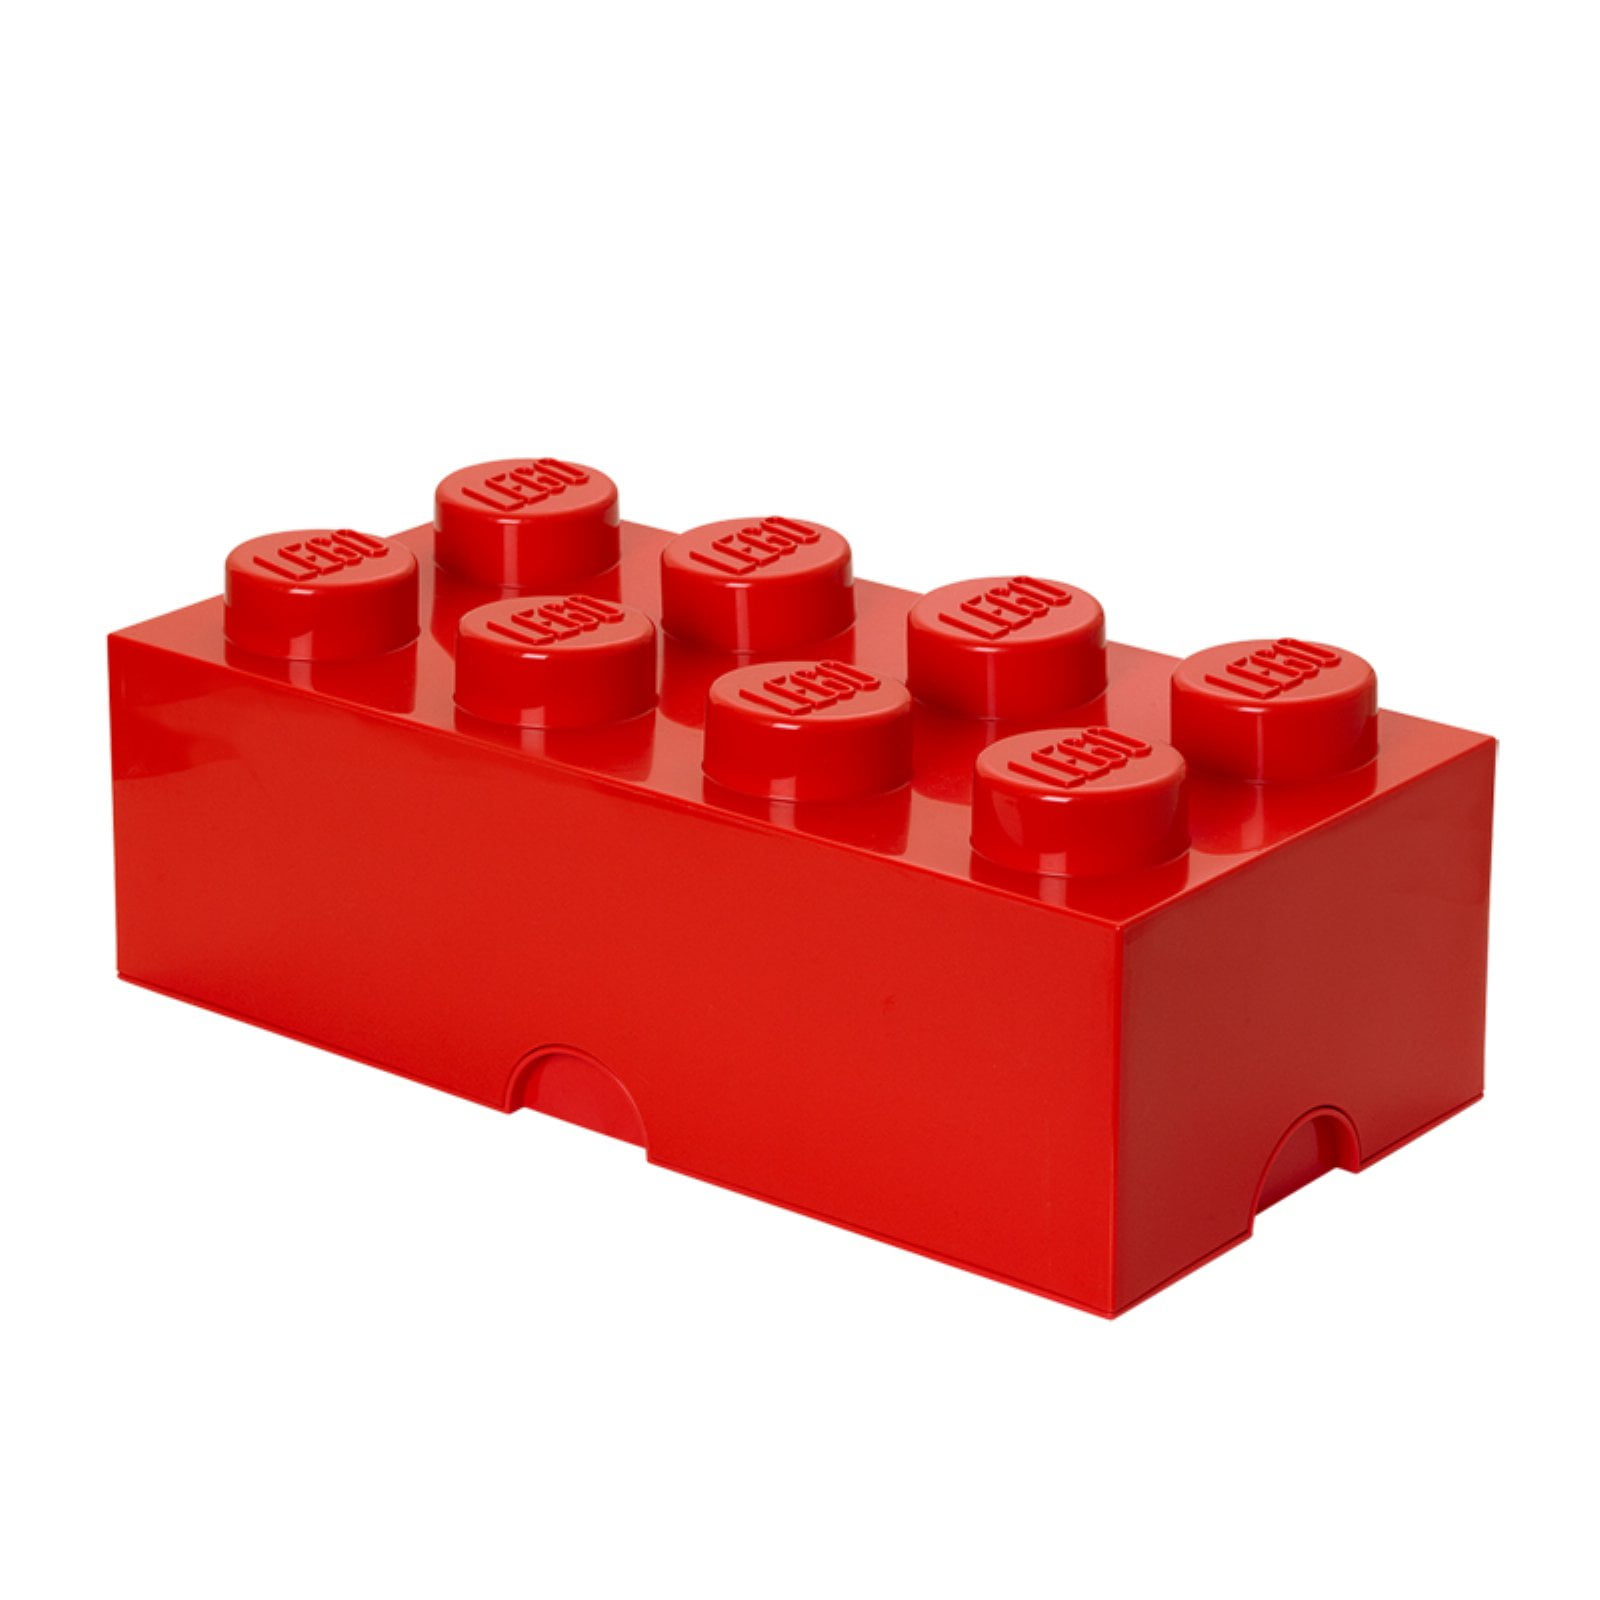 Lego 8 & 4 Stud Brick Storage Container Boxes With 20 Pounds of LEGO Pieces